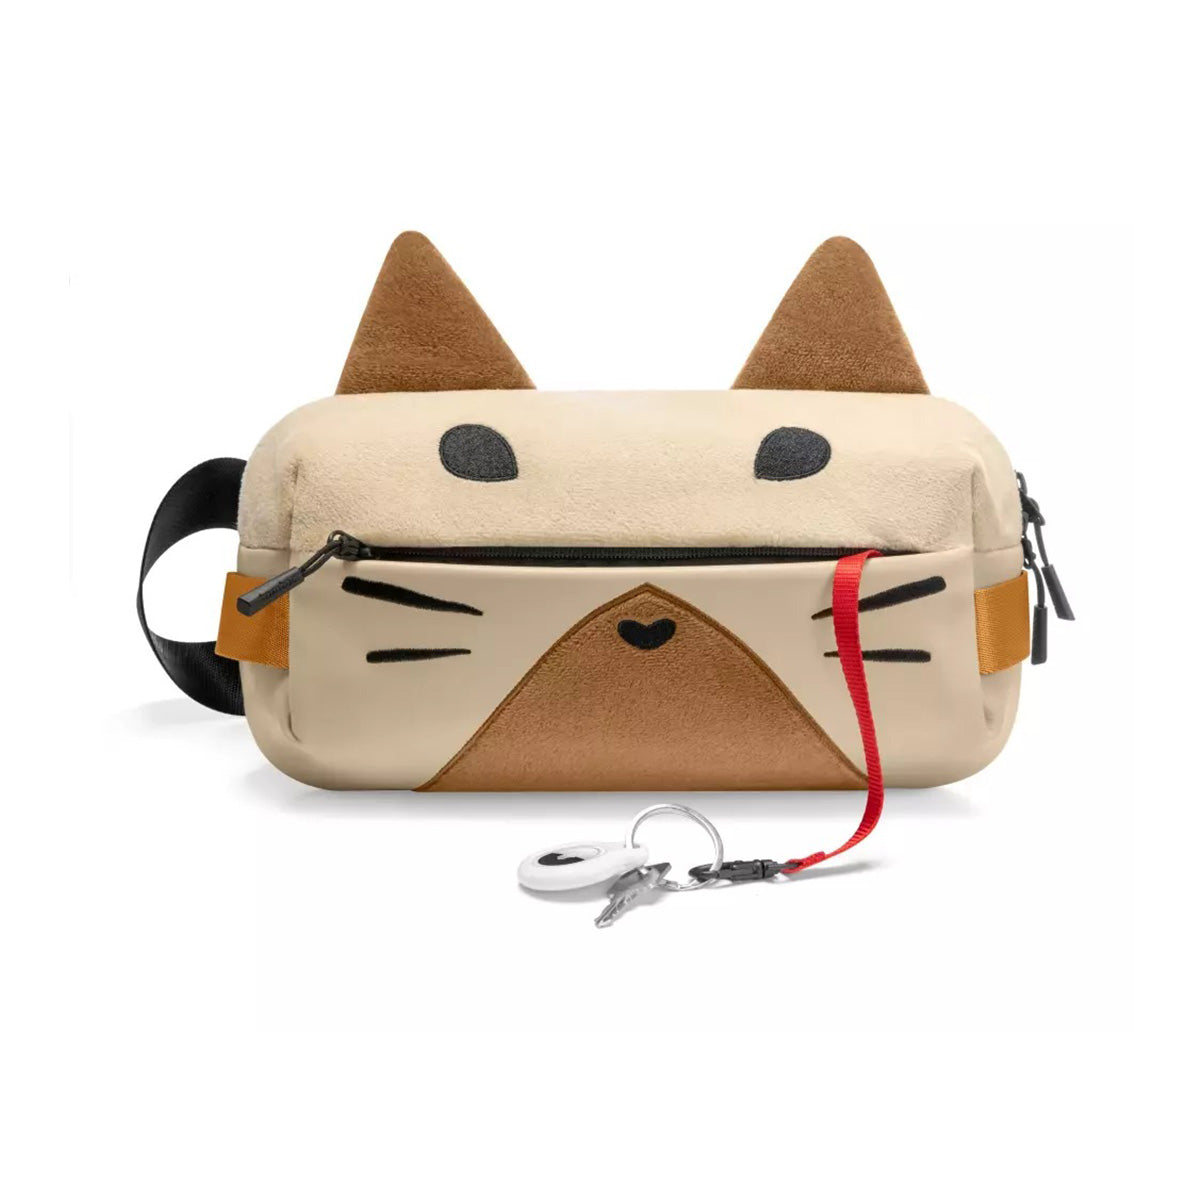 Tomtoc MHRS-H02 Palico Sling Bag